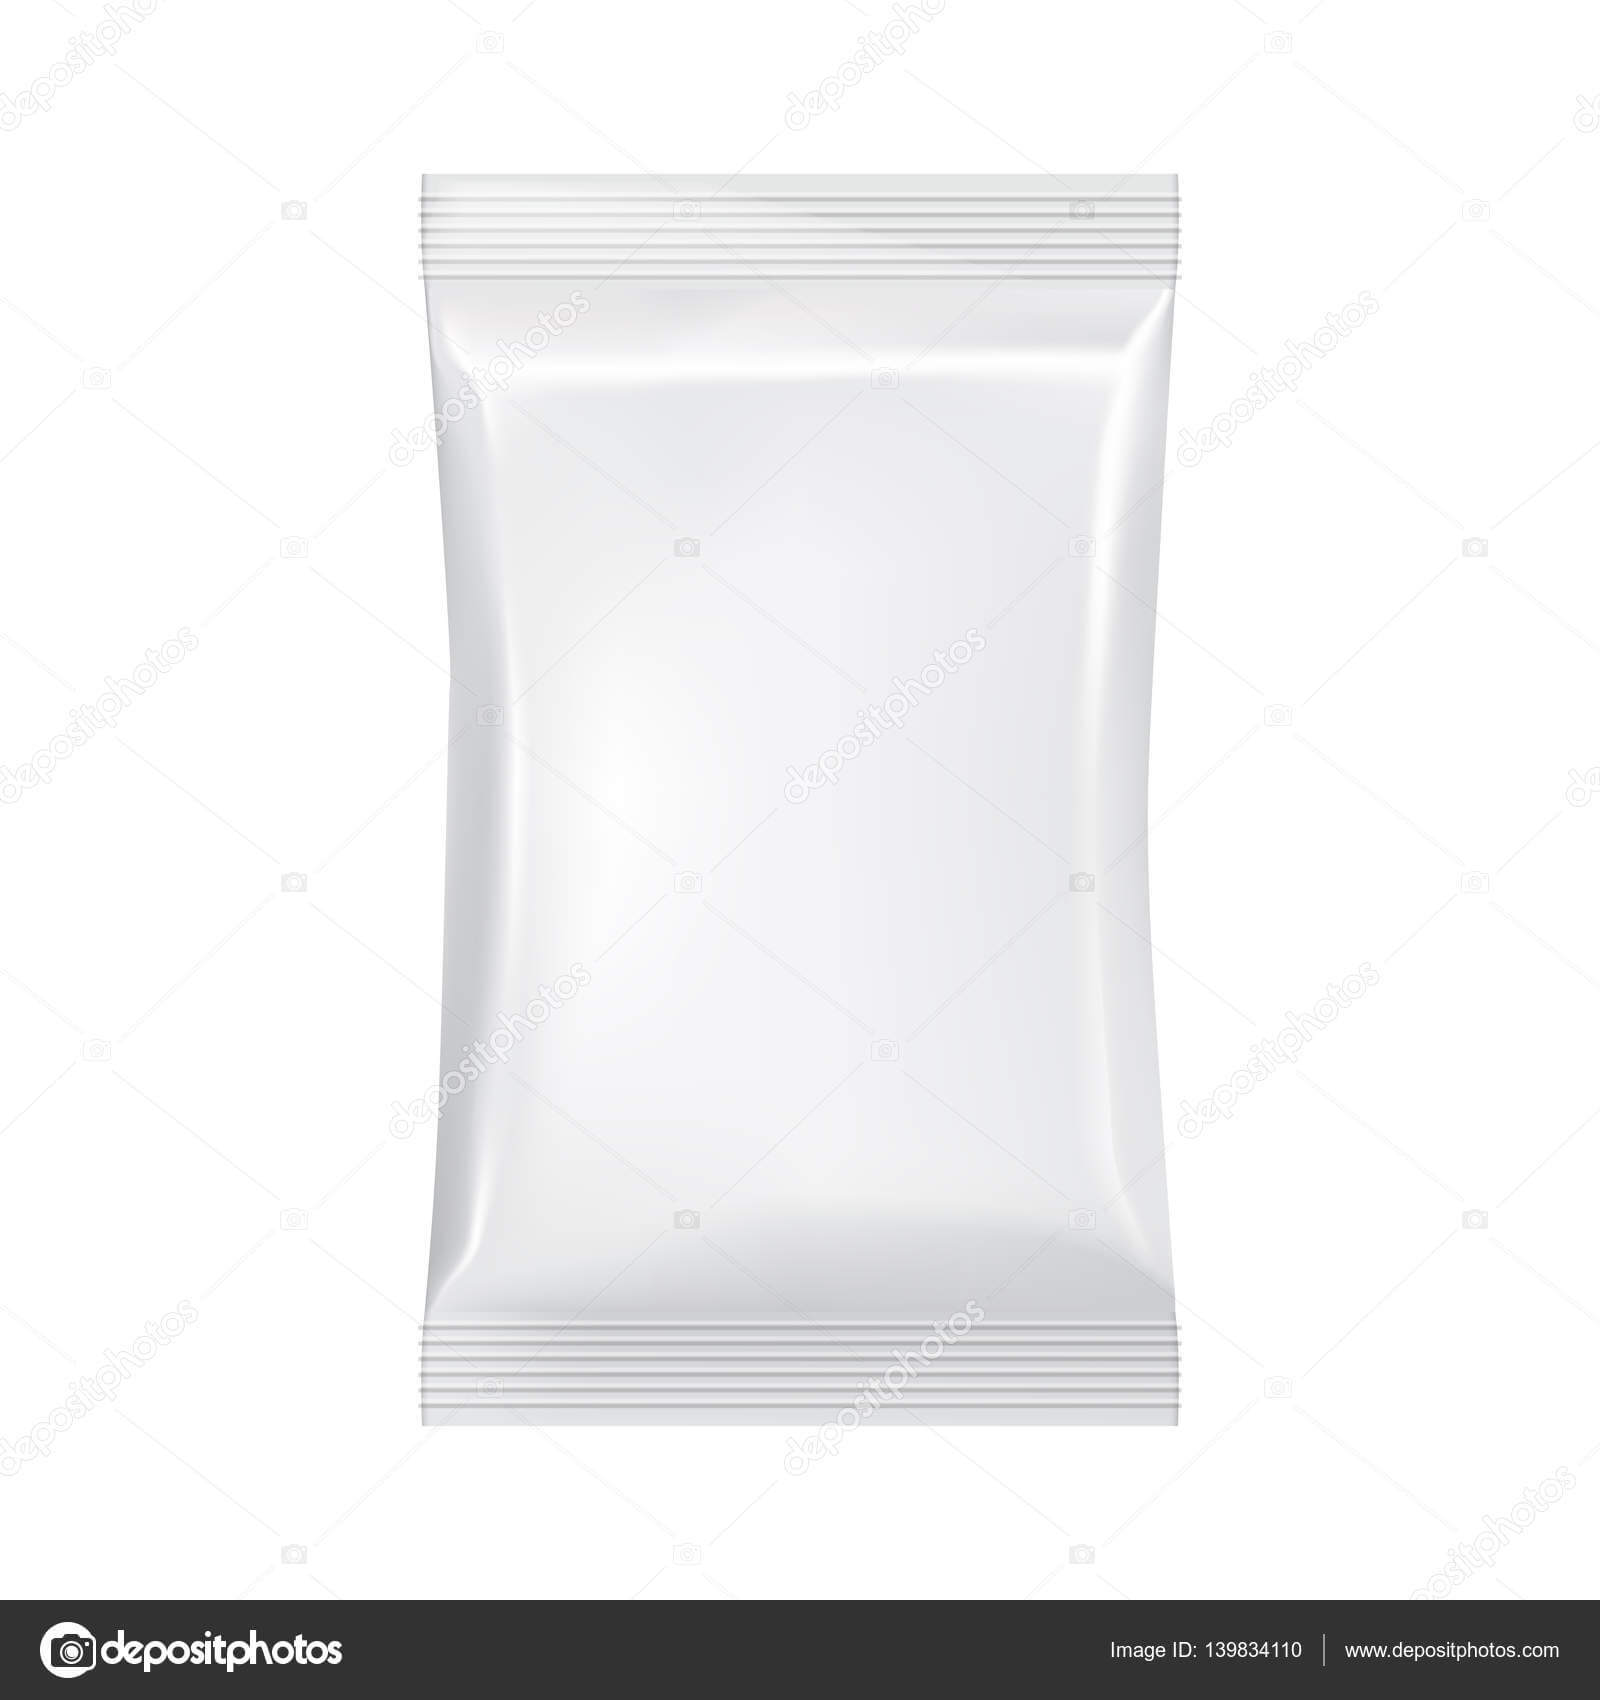 Blank Packaging Template Mockup Isolated On White. — Stock With Blank Packaging Templates